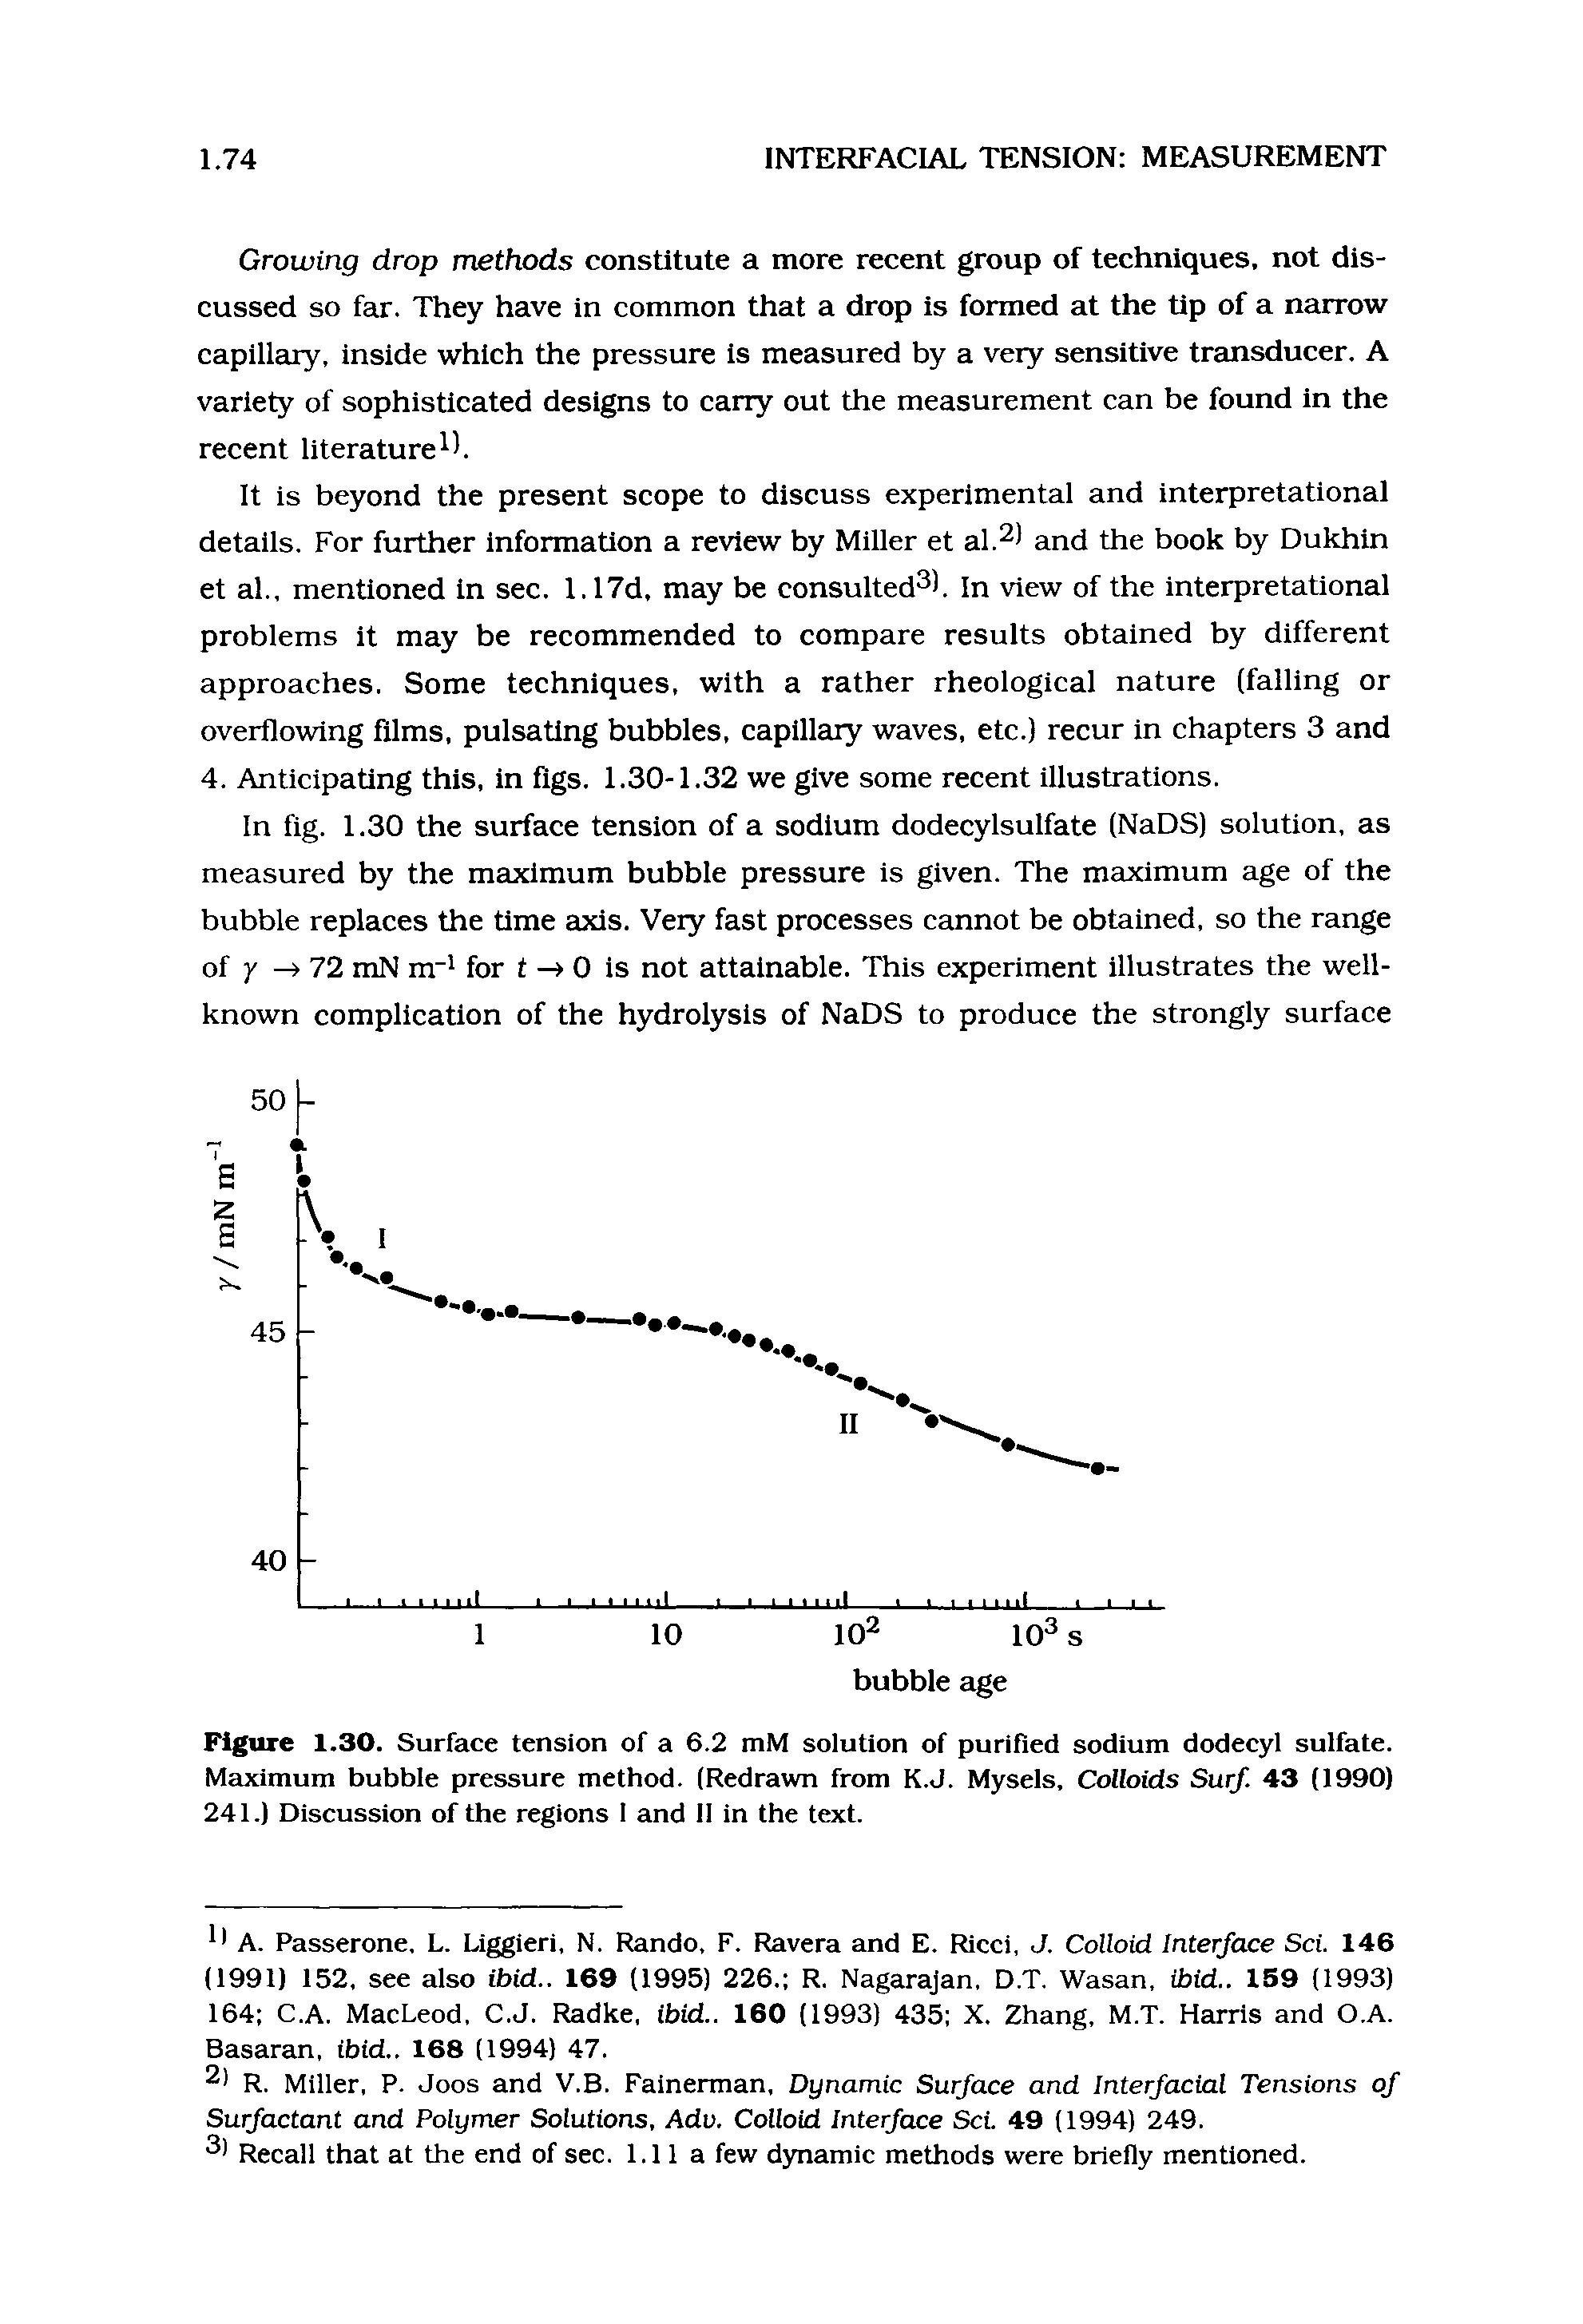 Figure 1.30. Surface tension of a 6.2 mM solution of purified sodium dodecyl sulfate. Maximum bubble pressure method. (Redrawn from K.J. Mysels, Colloids Surf. 43 (1990) 241.) Discussion of the regions I and II in the text.